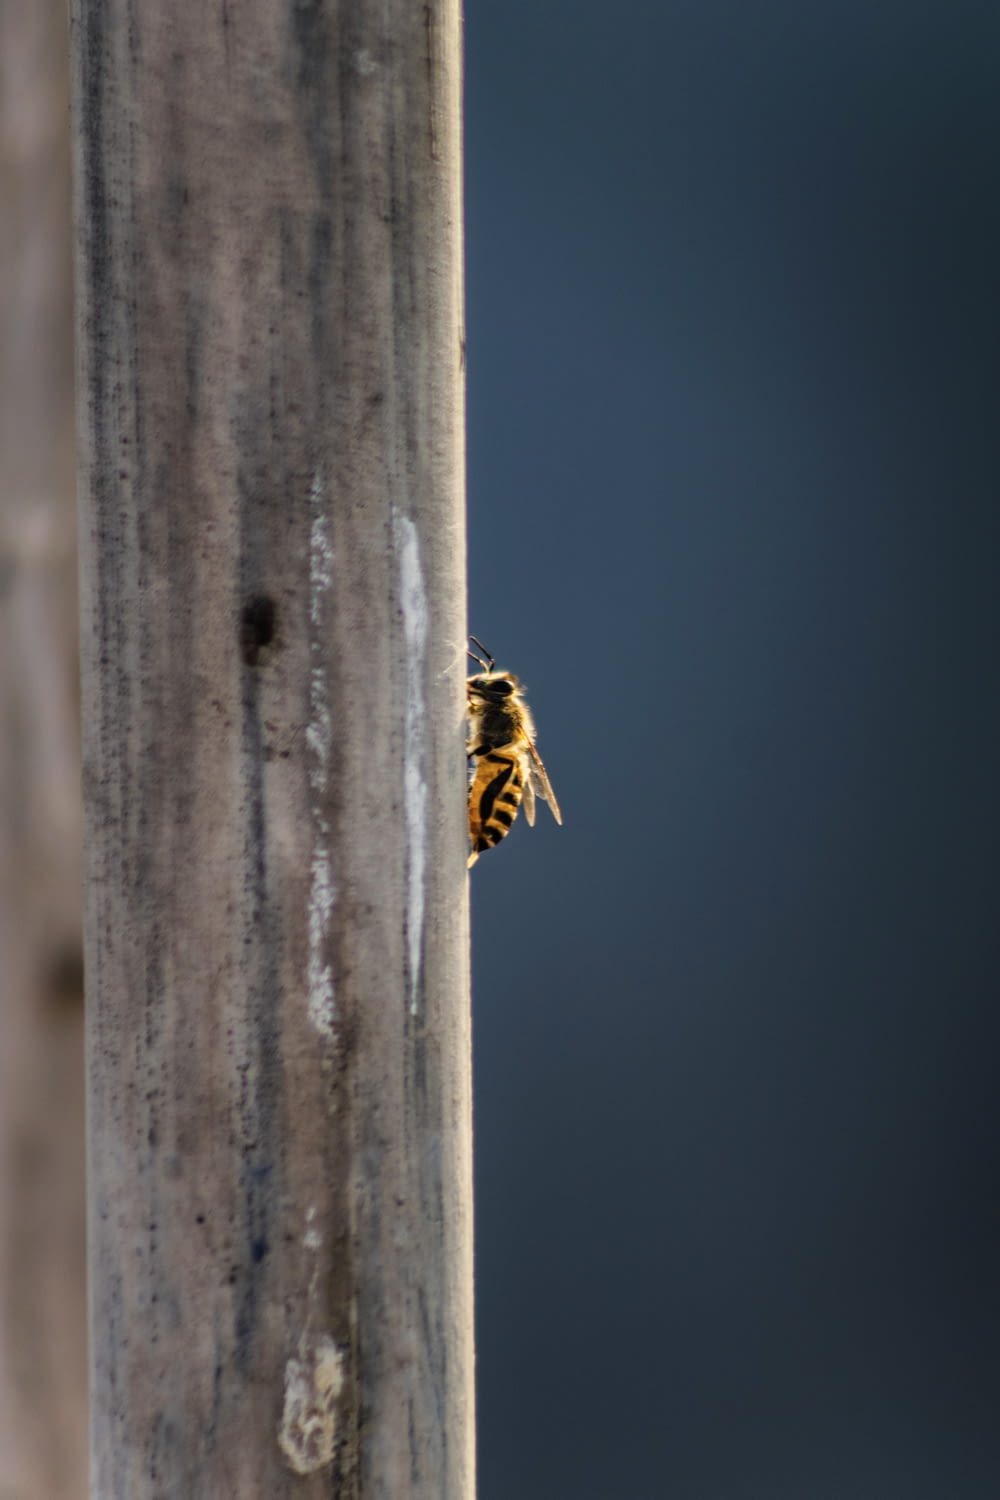 a bee on a wood post